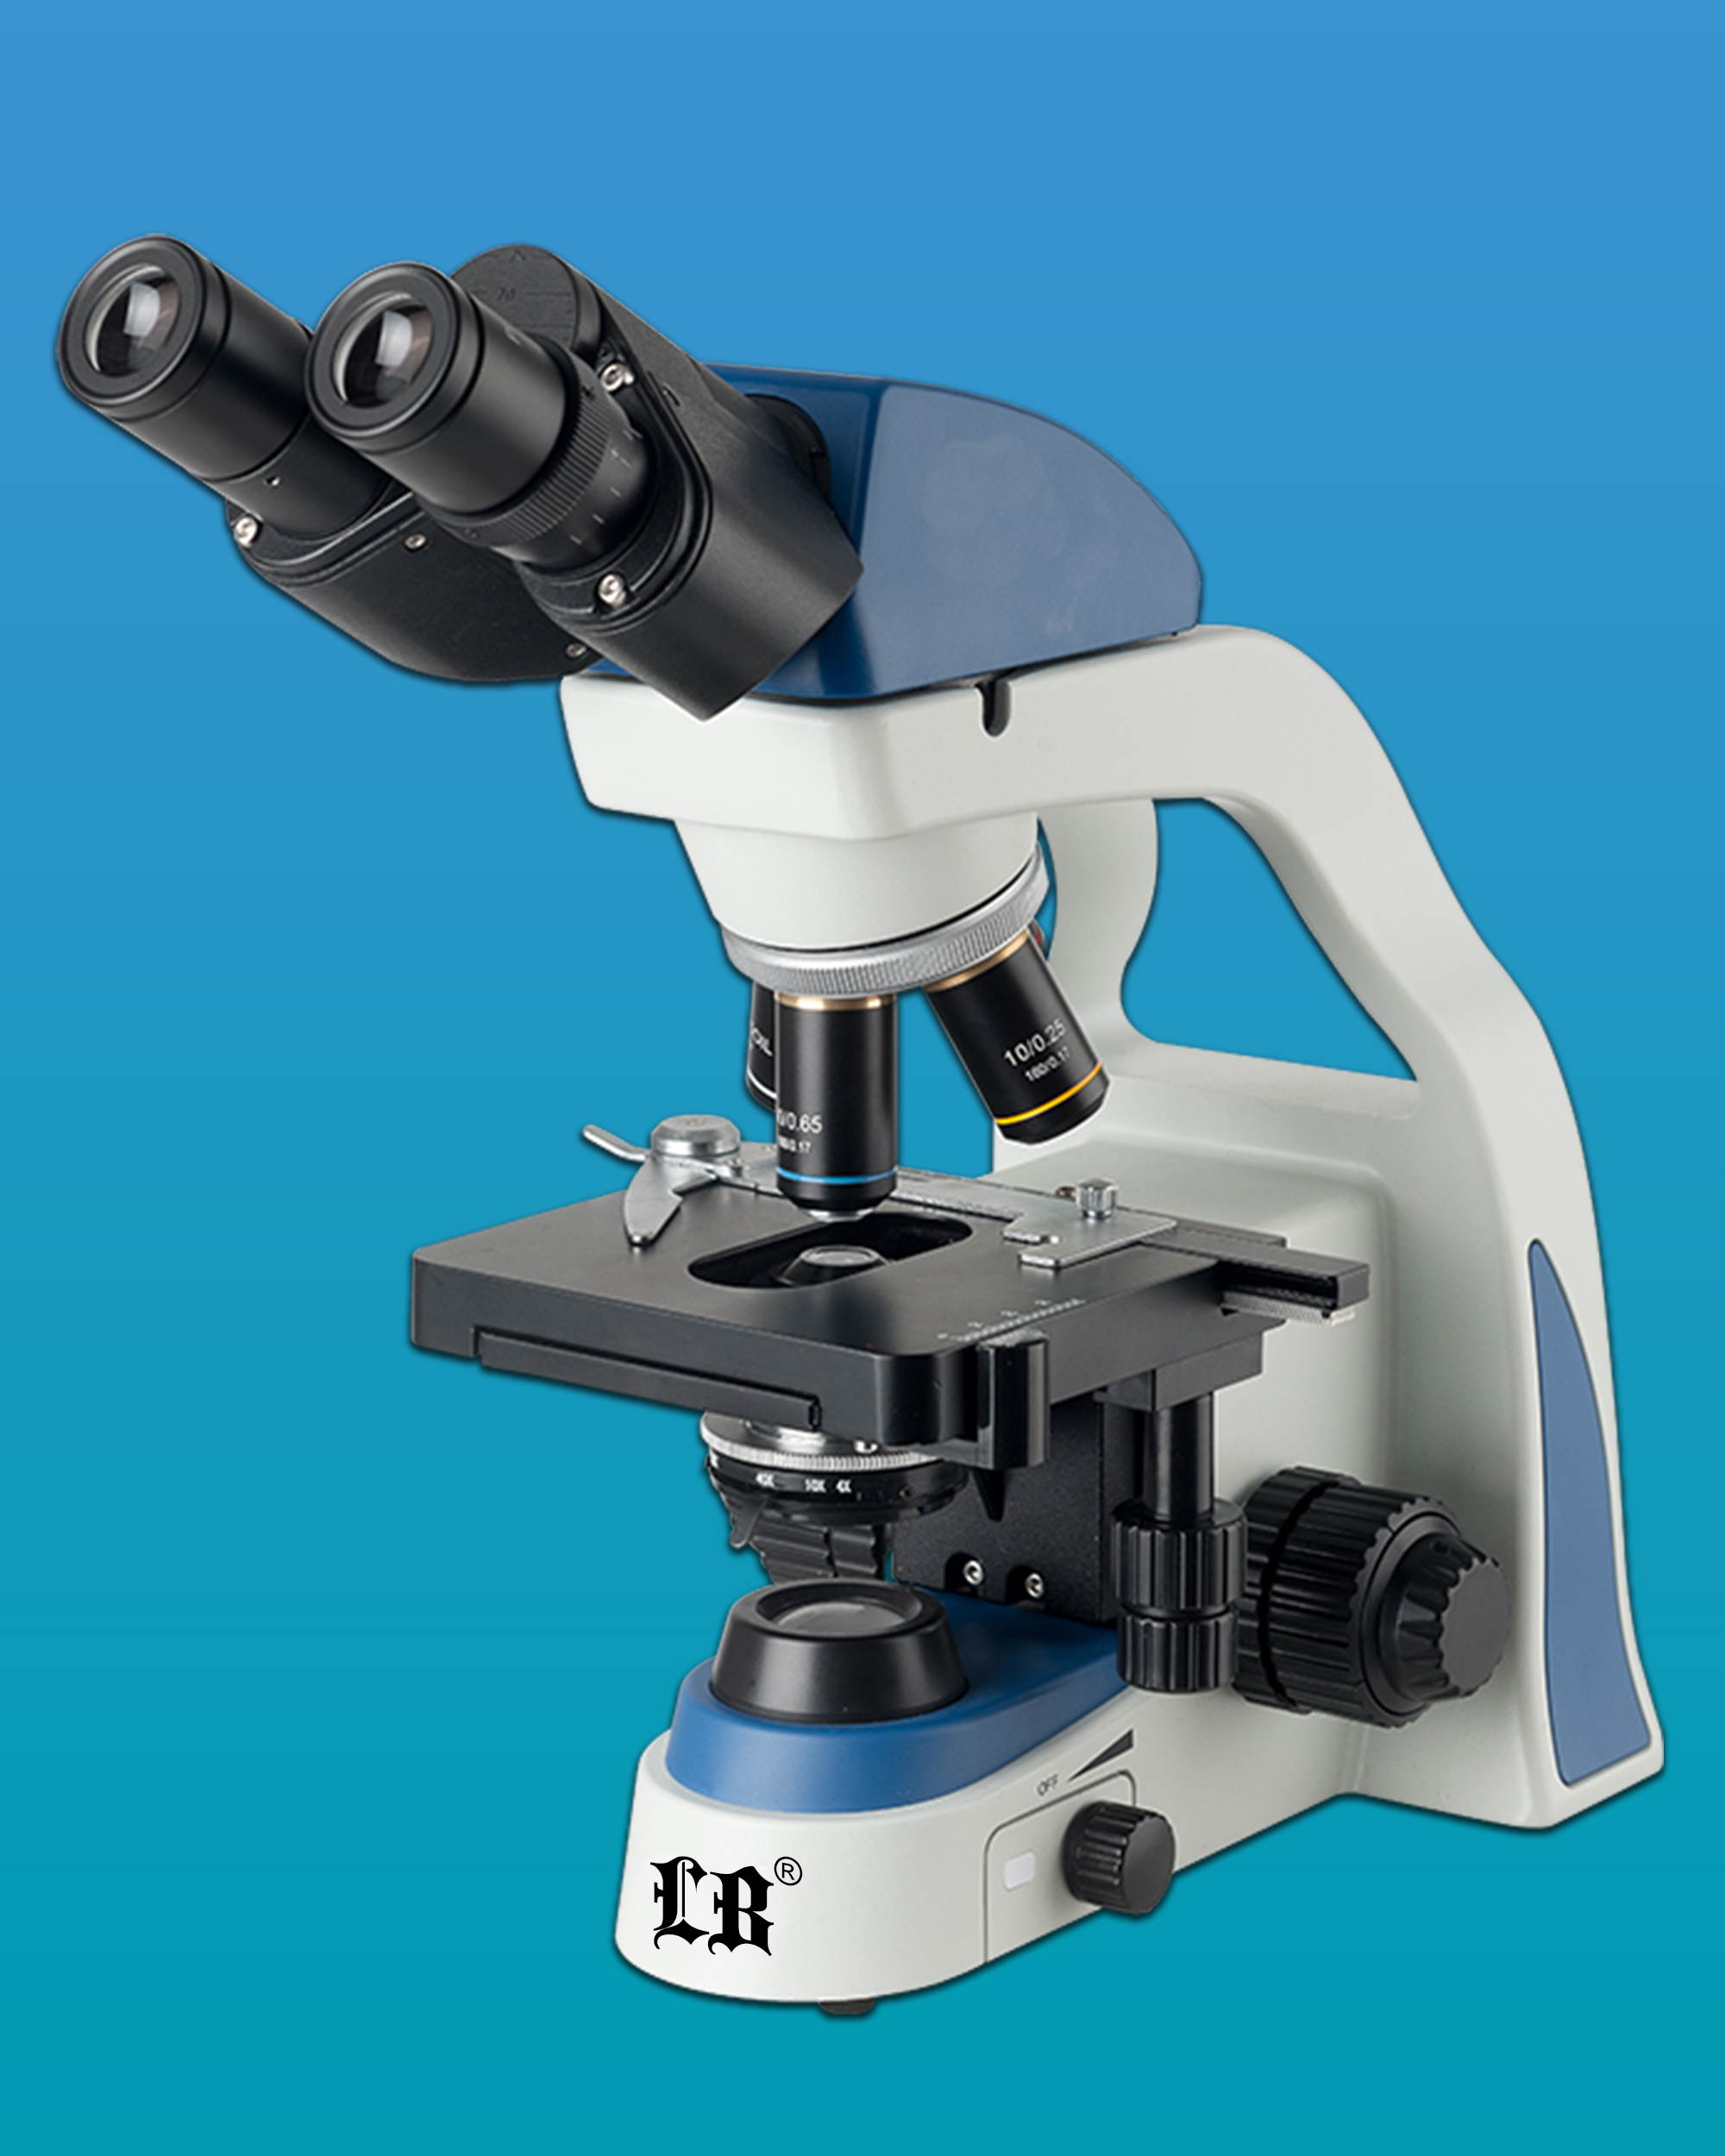 LB-206 Biological Microscope with Infinite Optical System and Infinite Plan Achromatic Objective 4, 10, 40, 100(Oil)